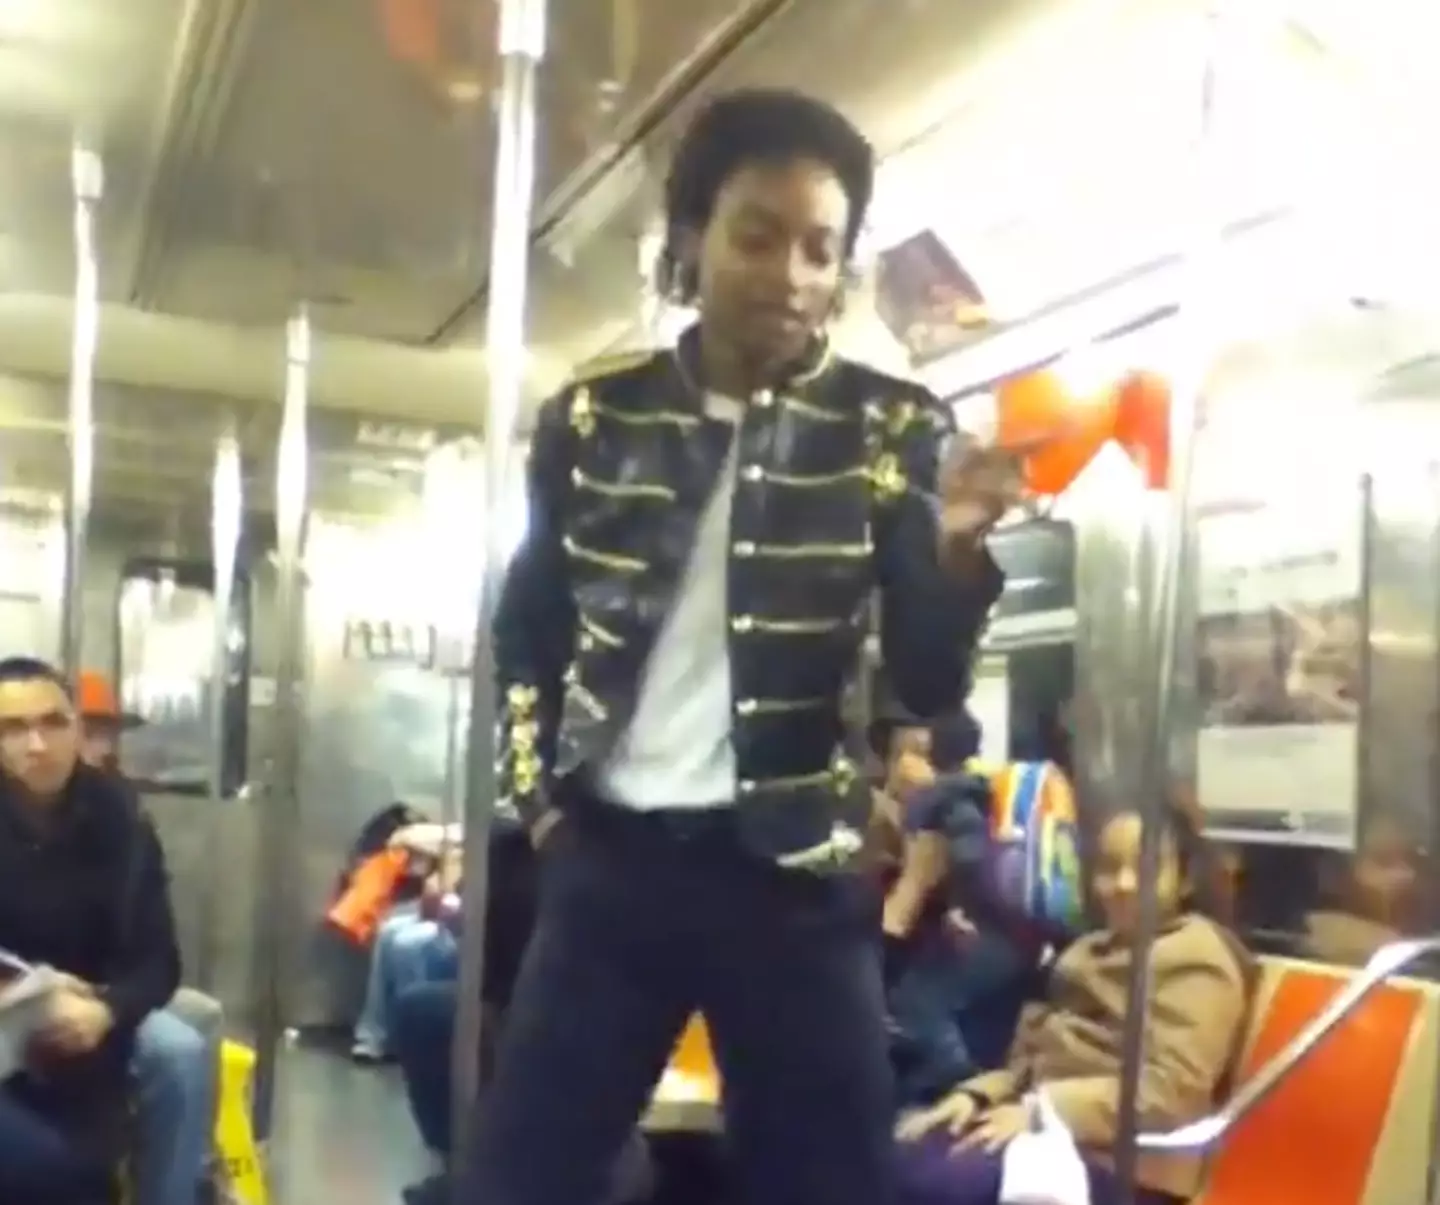 Jordan Neely was known to perform as Michael Jackson on subways.